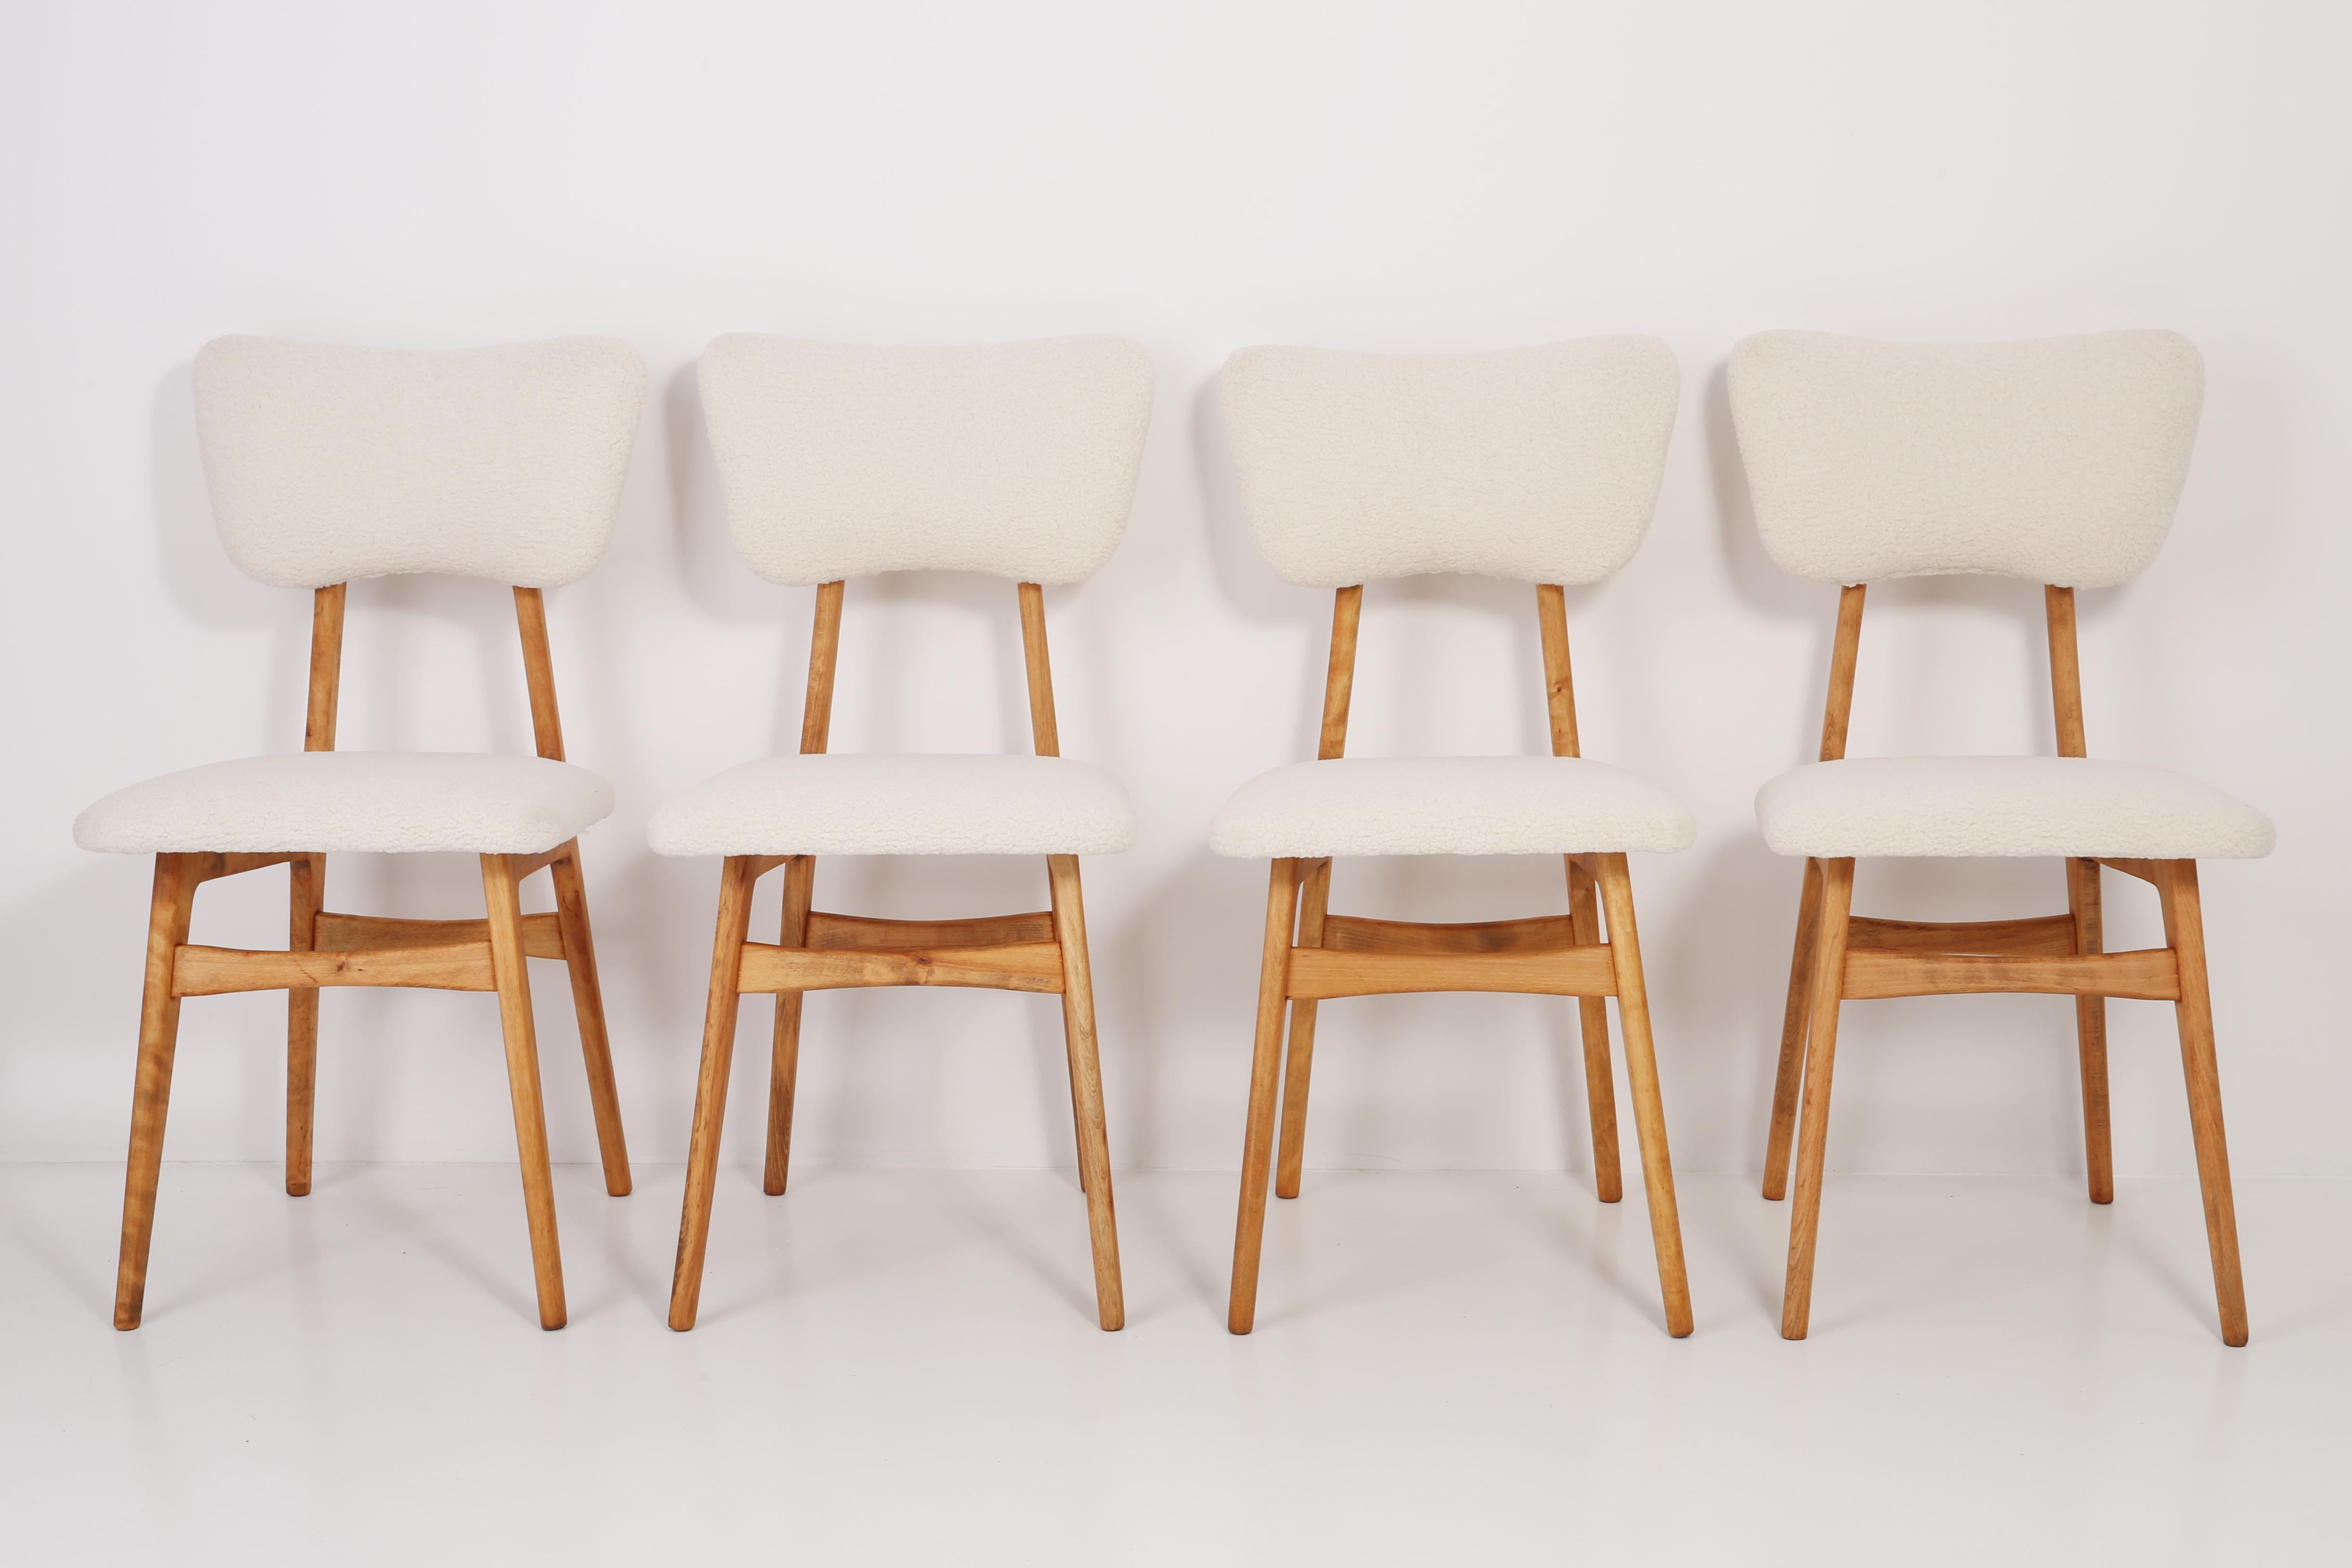 Chairs designed by Prof. Rajmund Halas. Made of beechwood. Chair is after a complete upholstery renovation, the woodwork has been refreshed. Seat and back is dressed in crème, durable and pleasant to the touch bouclé fabric. Chair is stabile and